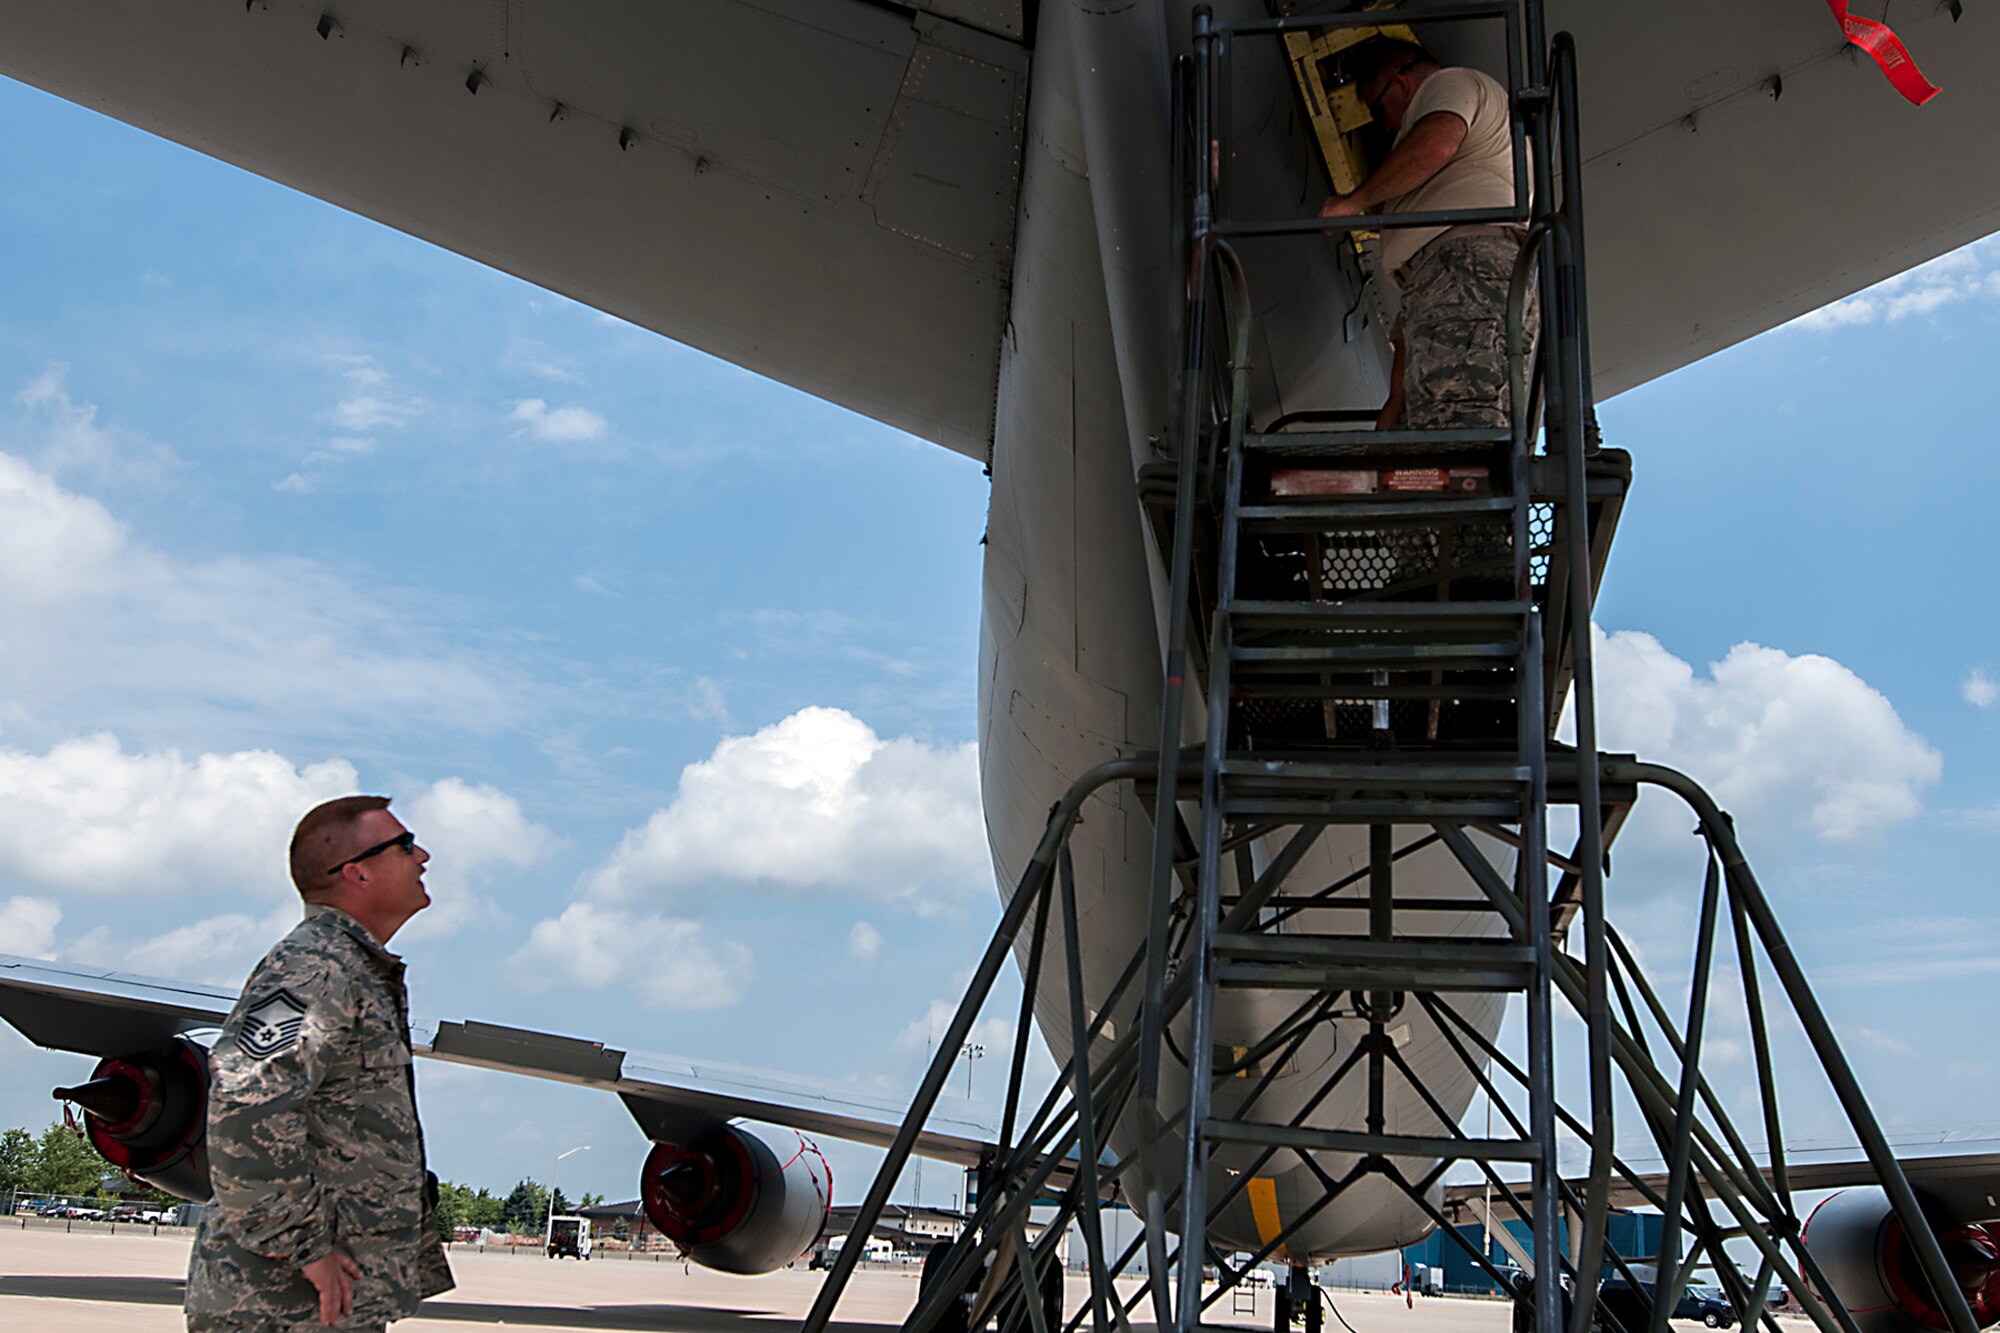 Senior Master Sgt. Michael Young, 434th Maintenance Group quality assurance inspector, looks on as two crew chiefs from the 434th Aircraft Maintenance Squadron replace a damaged elevator snubber July 13, 2016 at Grissom Air Reserve Base, Ind. The 434th MXG QA section was recently awarded the 2015 Air Force Reserve Command Quality Assurance Section of the Year Award. (U.S. Air Force photo/Senior Airman Dakota Bergl) 